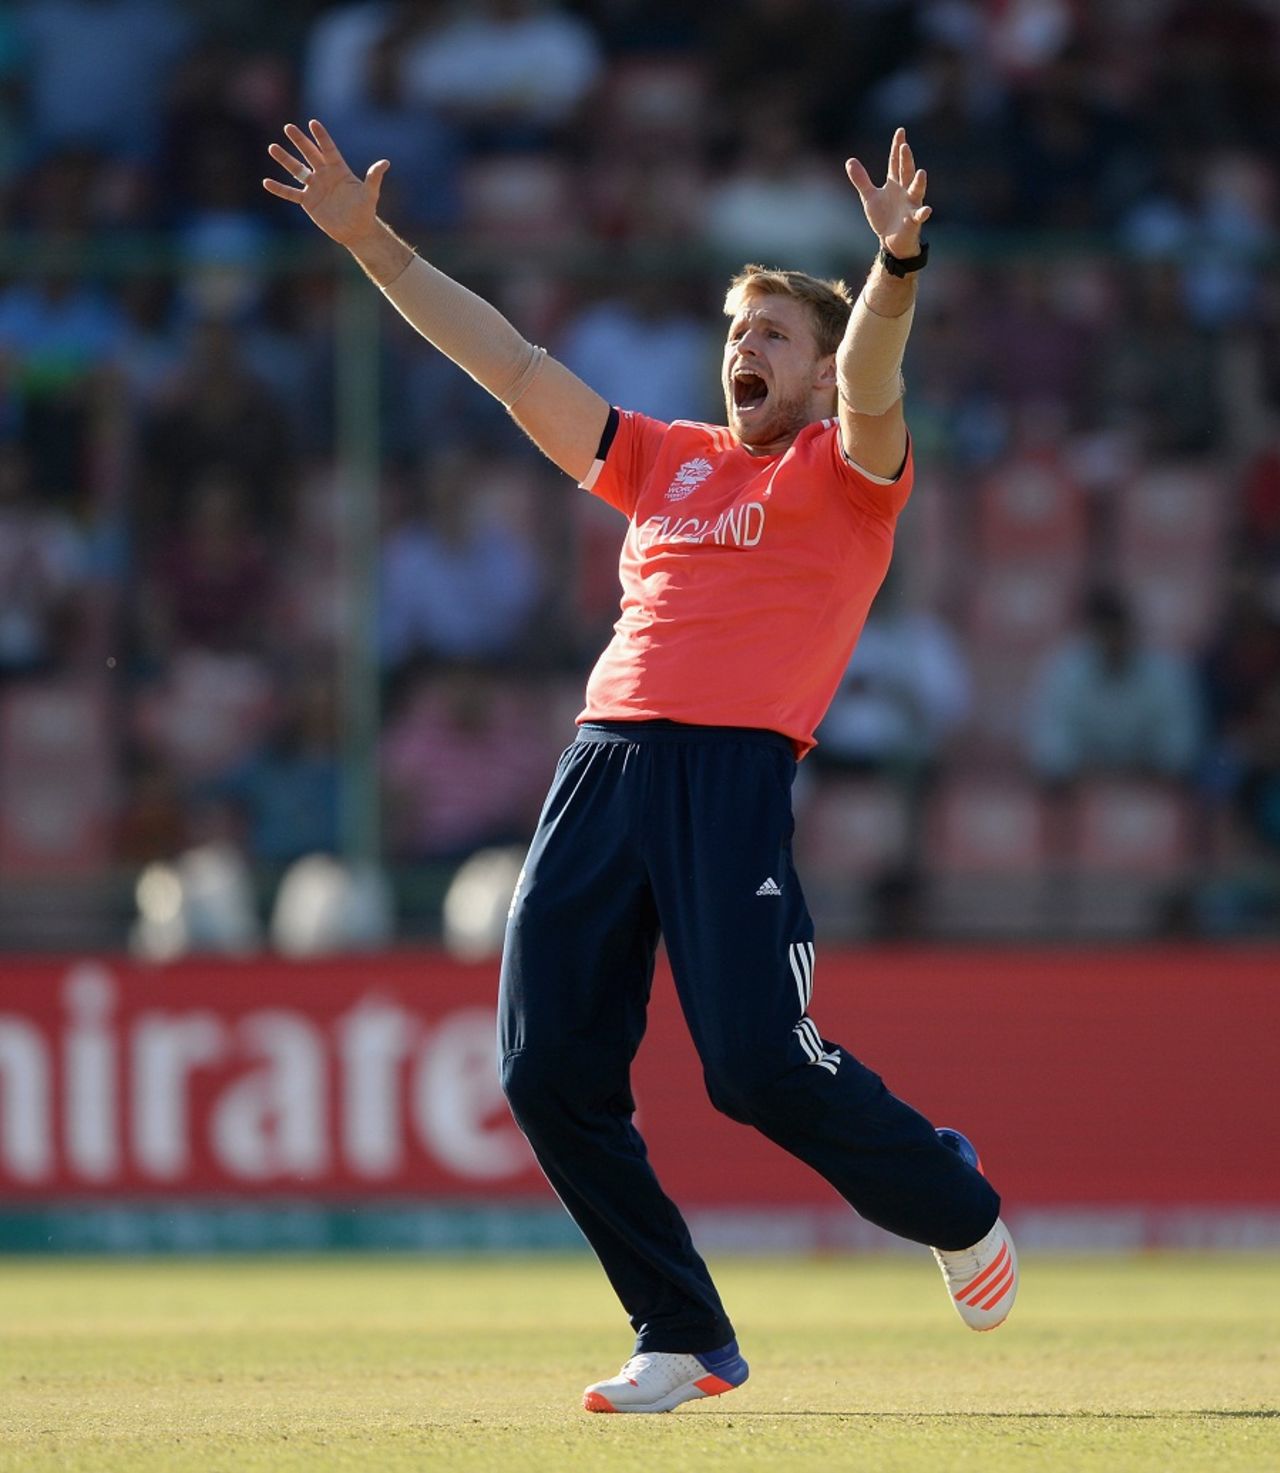 David Willey appeals for a wicket, Afghanistan v England, World T20 2016, Group 1, Delhi, March 23, 2016